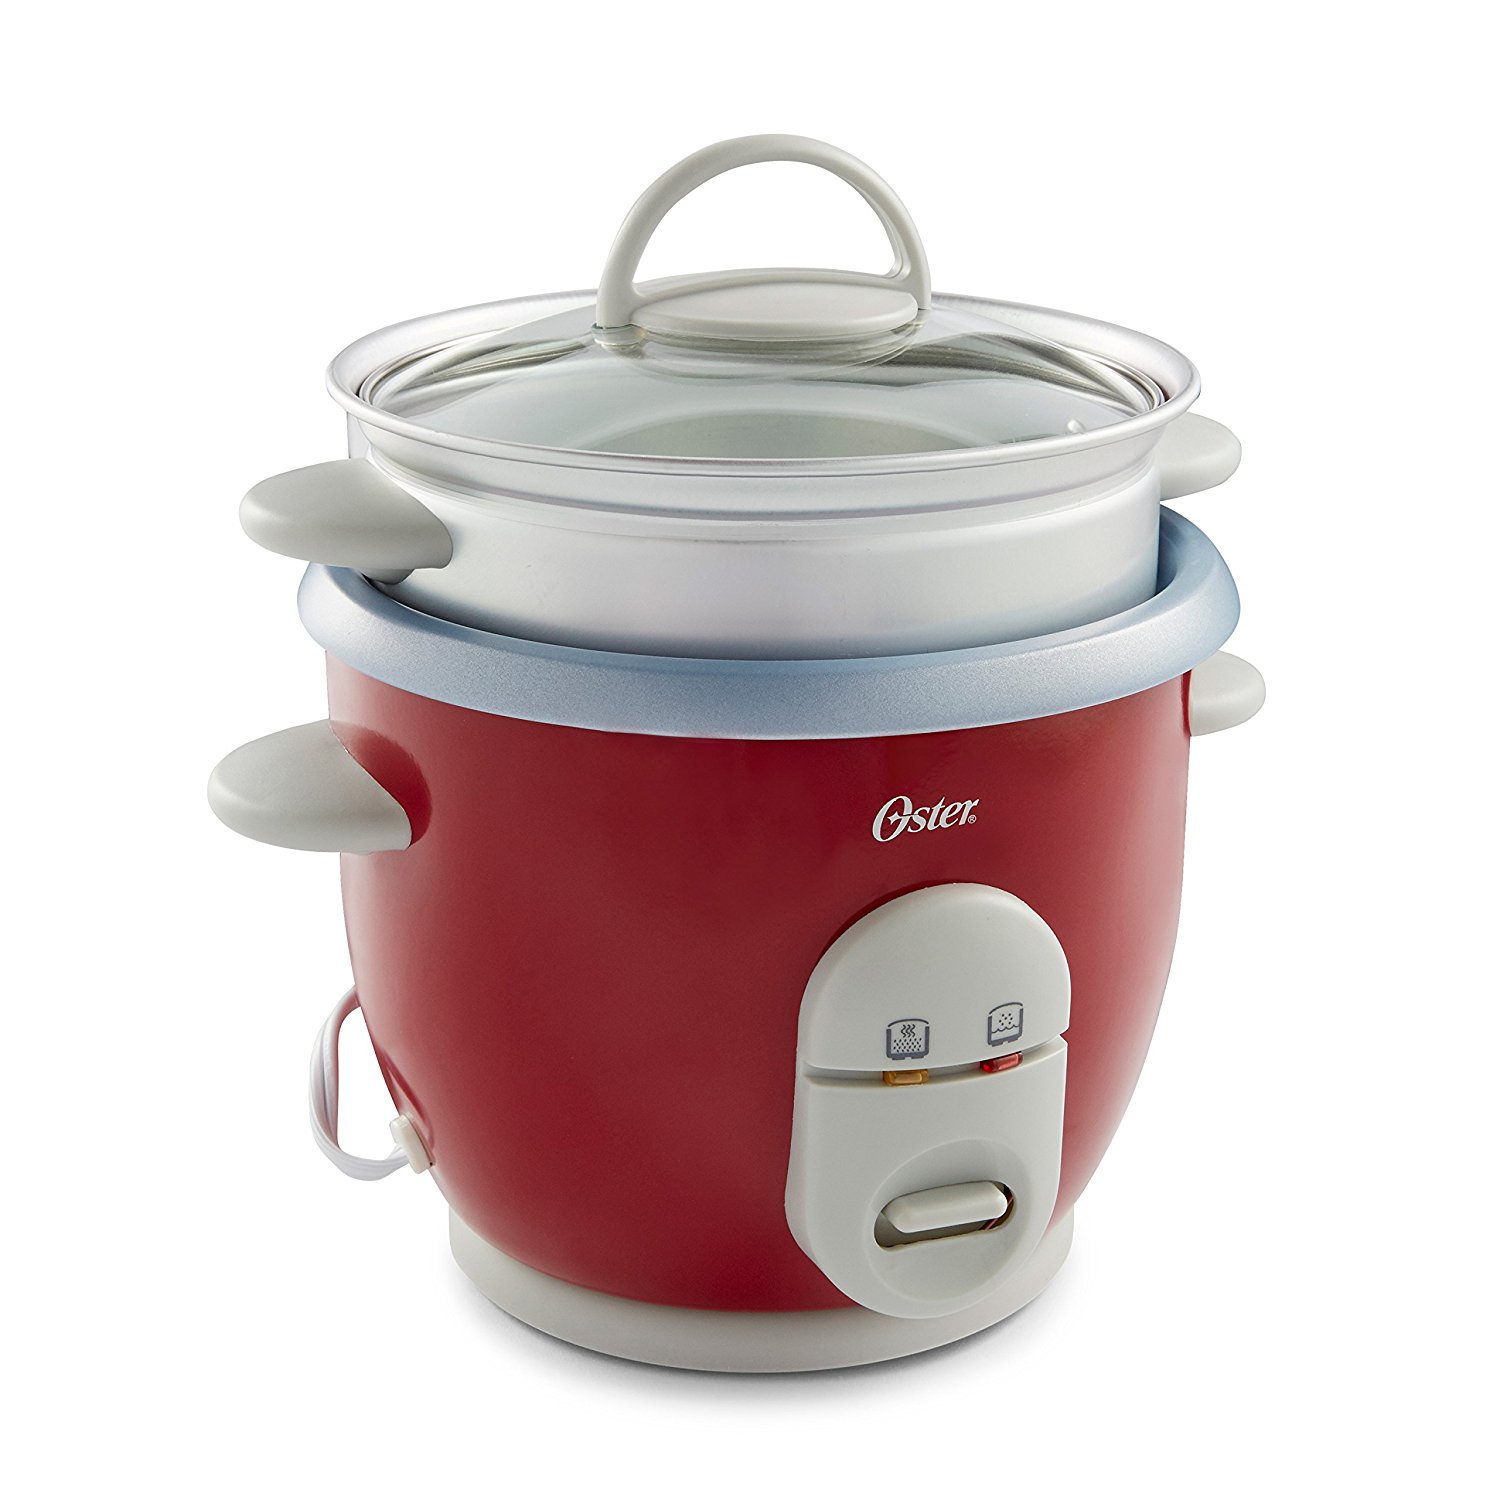 Oster 6-Cup Rice Cooker and Steamer, 4722 - image 5 of 6